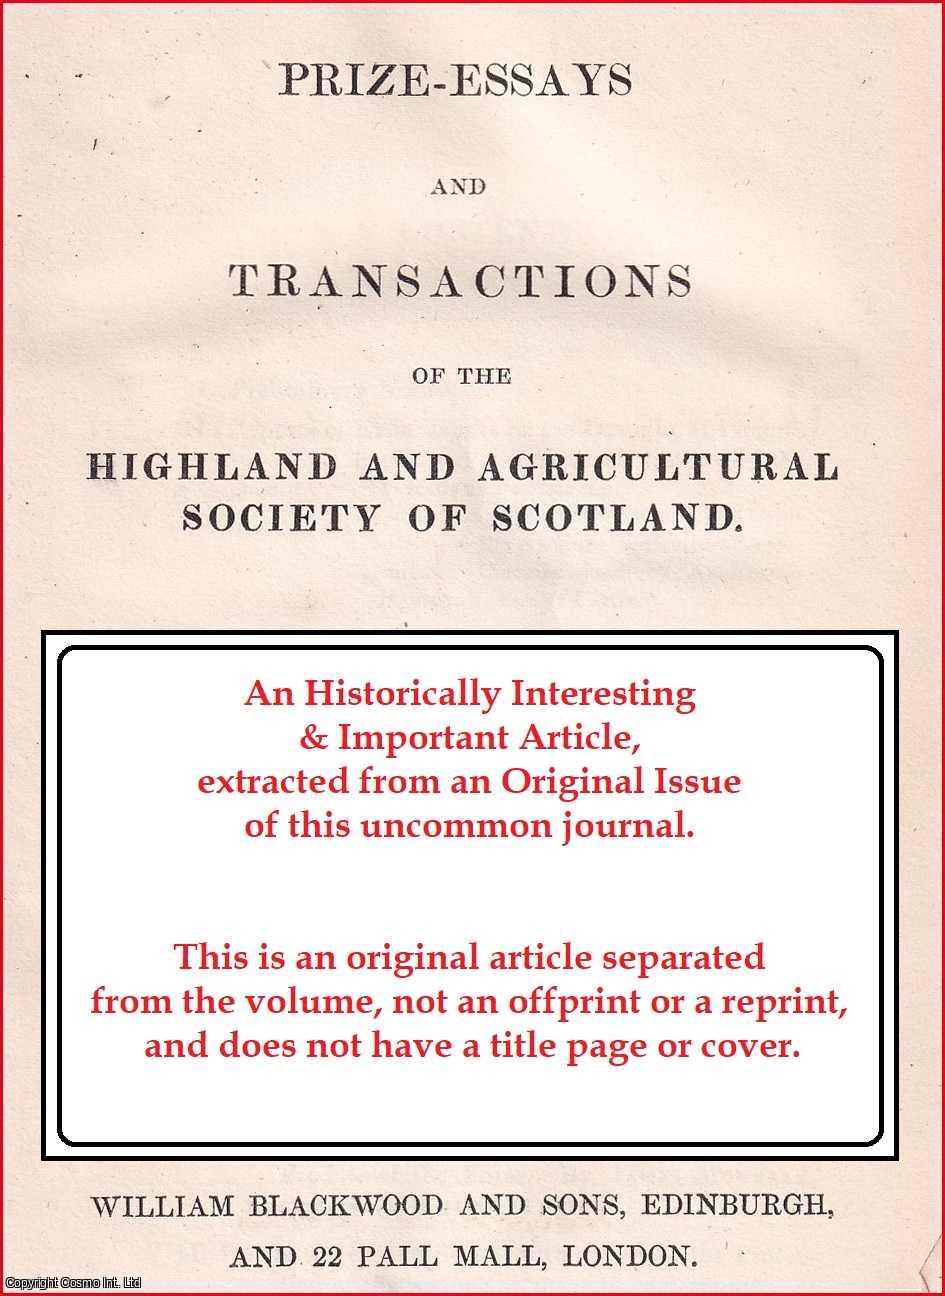 Mr. John Mitchell Junior, Leith. - The Use of Dutch Ashes as Manure. An uncommon original article from the Prize Essays and Transactions of the Highland Society of Scotland, 1835.